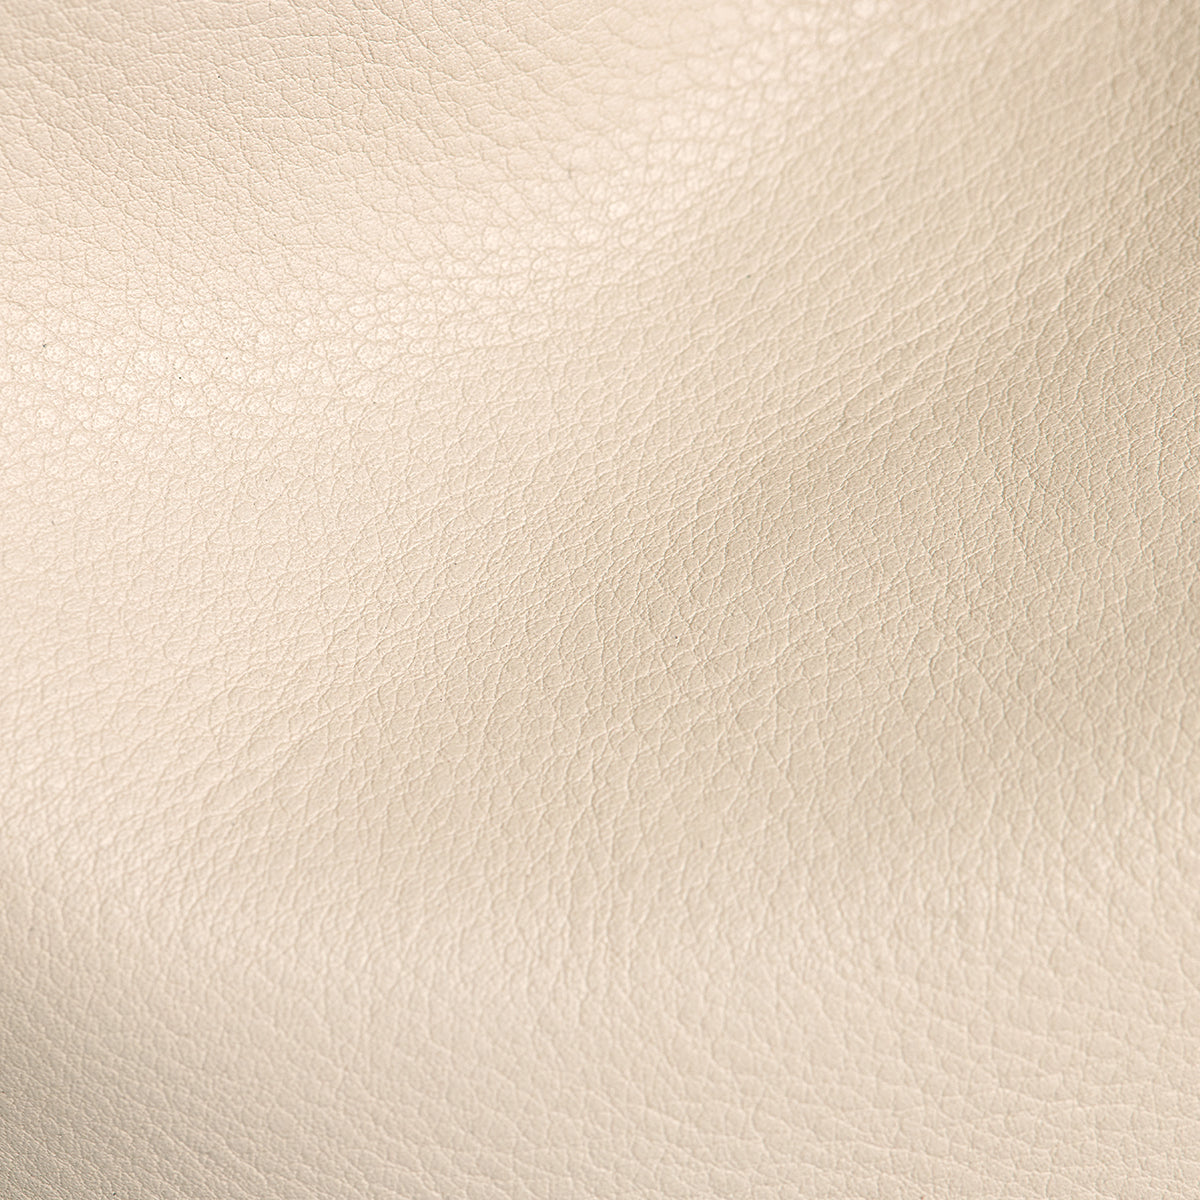 Tom-Zip-Chateau-Cream-Leather-Swatch